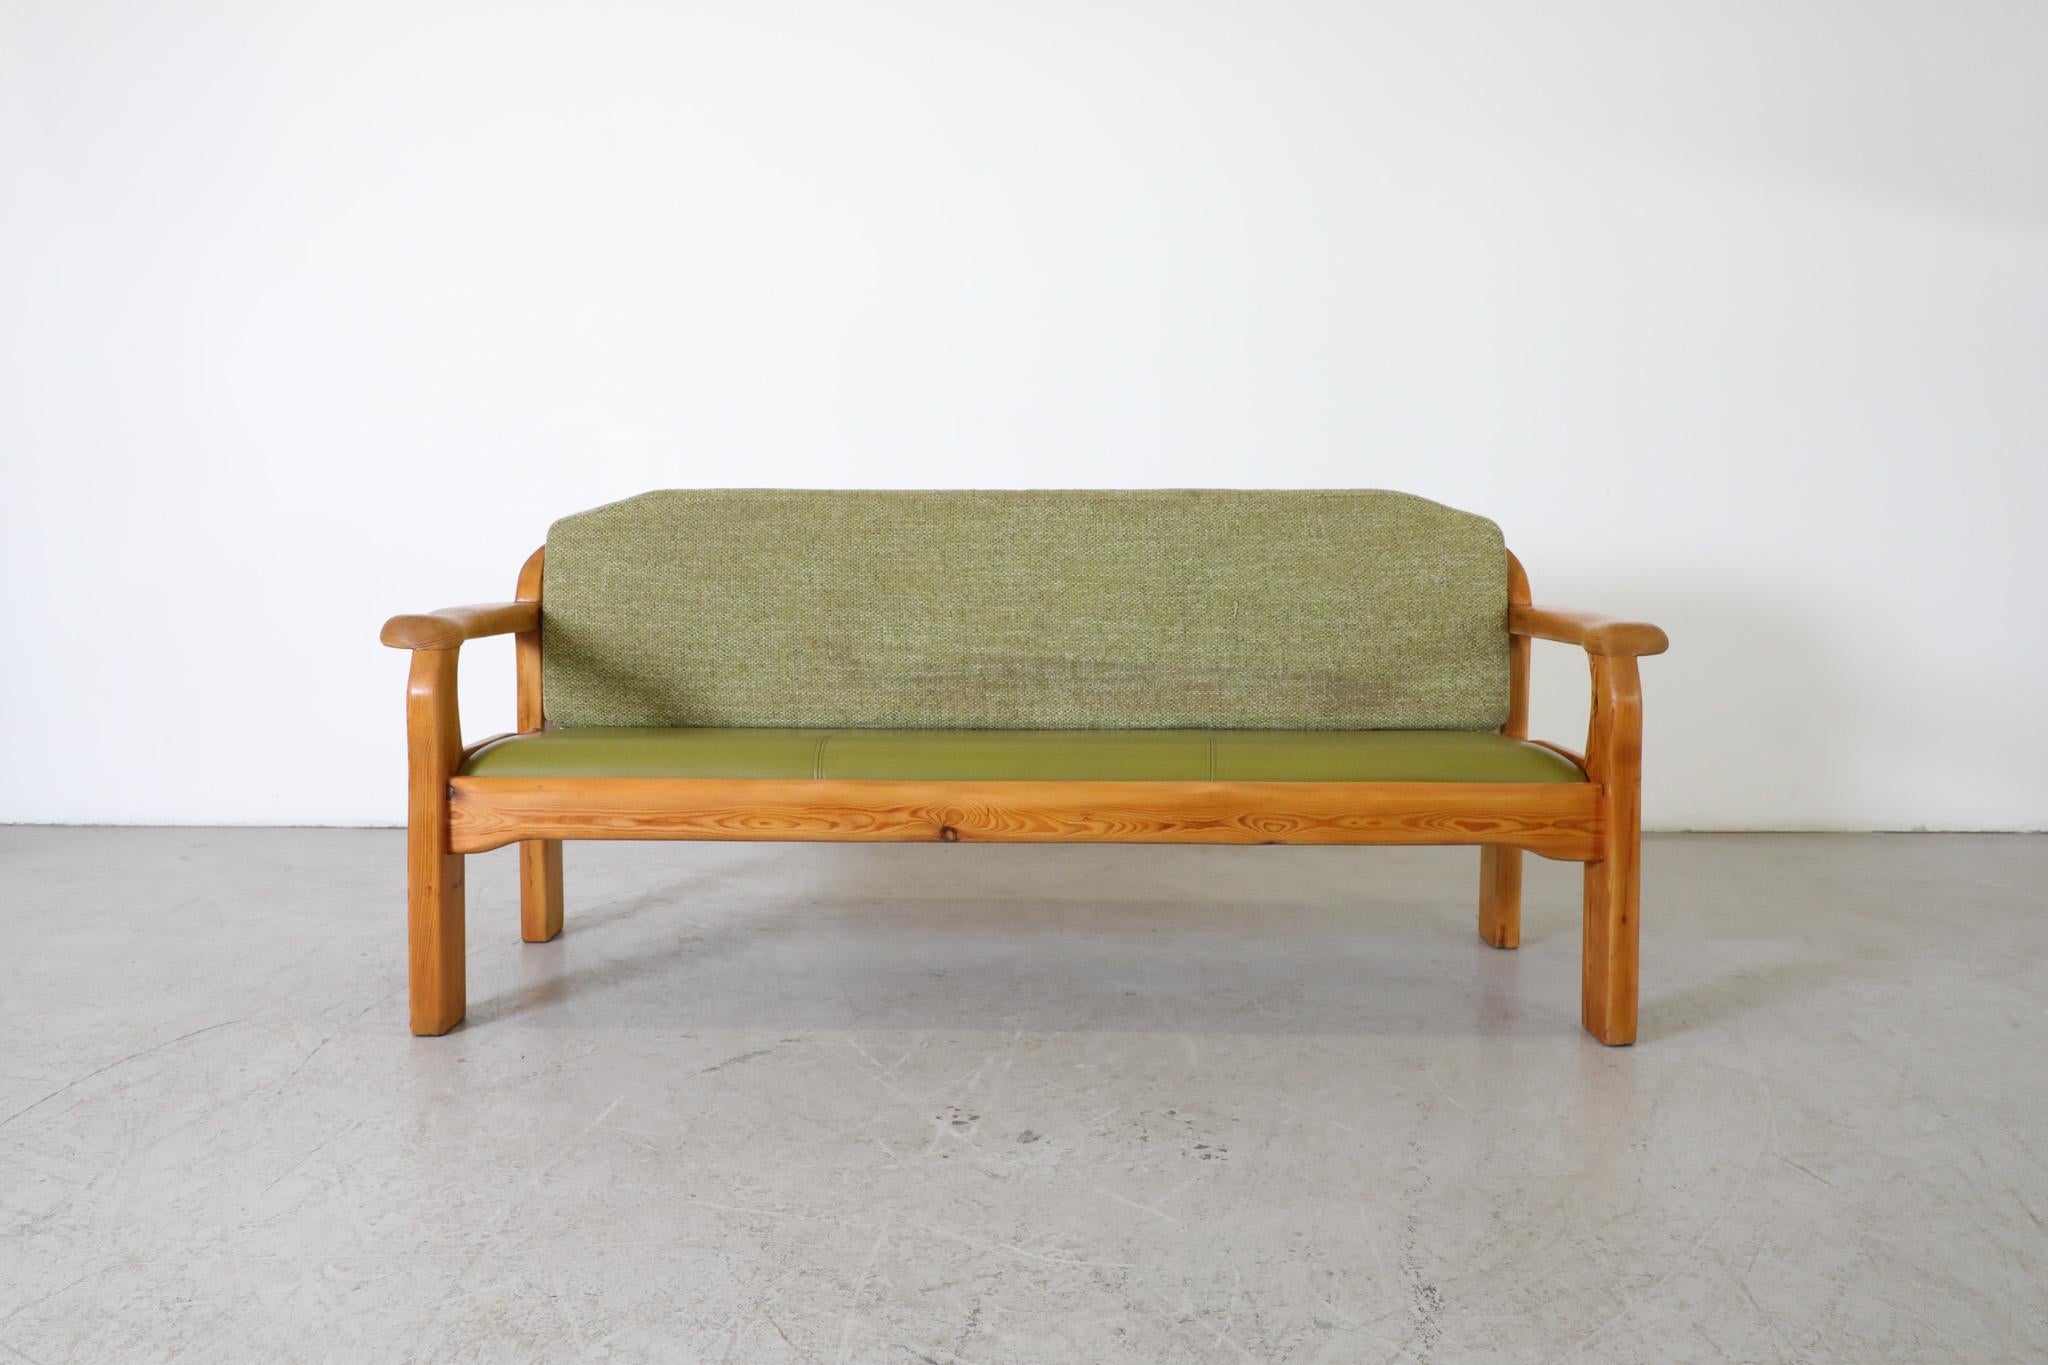 Ate van Apeldoorn style three seat pine bench with green skai seat and newly upholstered green fabric back cushion. An attractive piece with rounded edges and organic hand-carved details, including beautiful hewn armrests and a gently curved back.